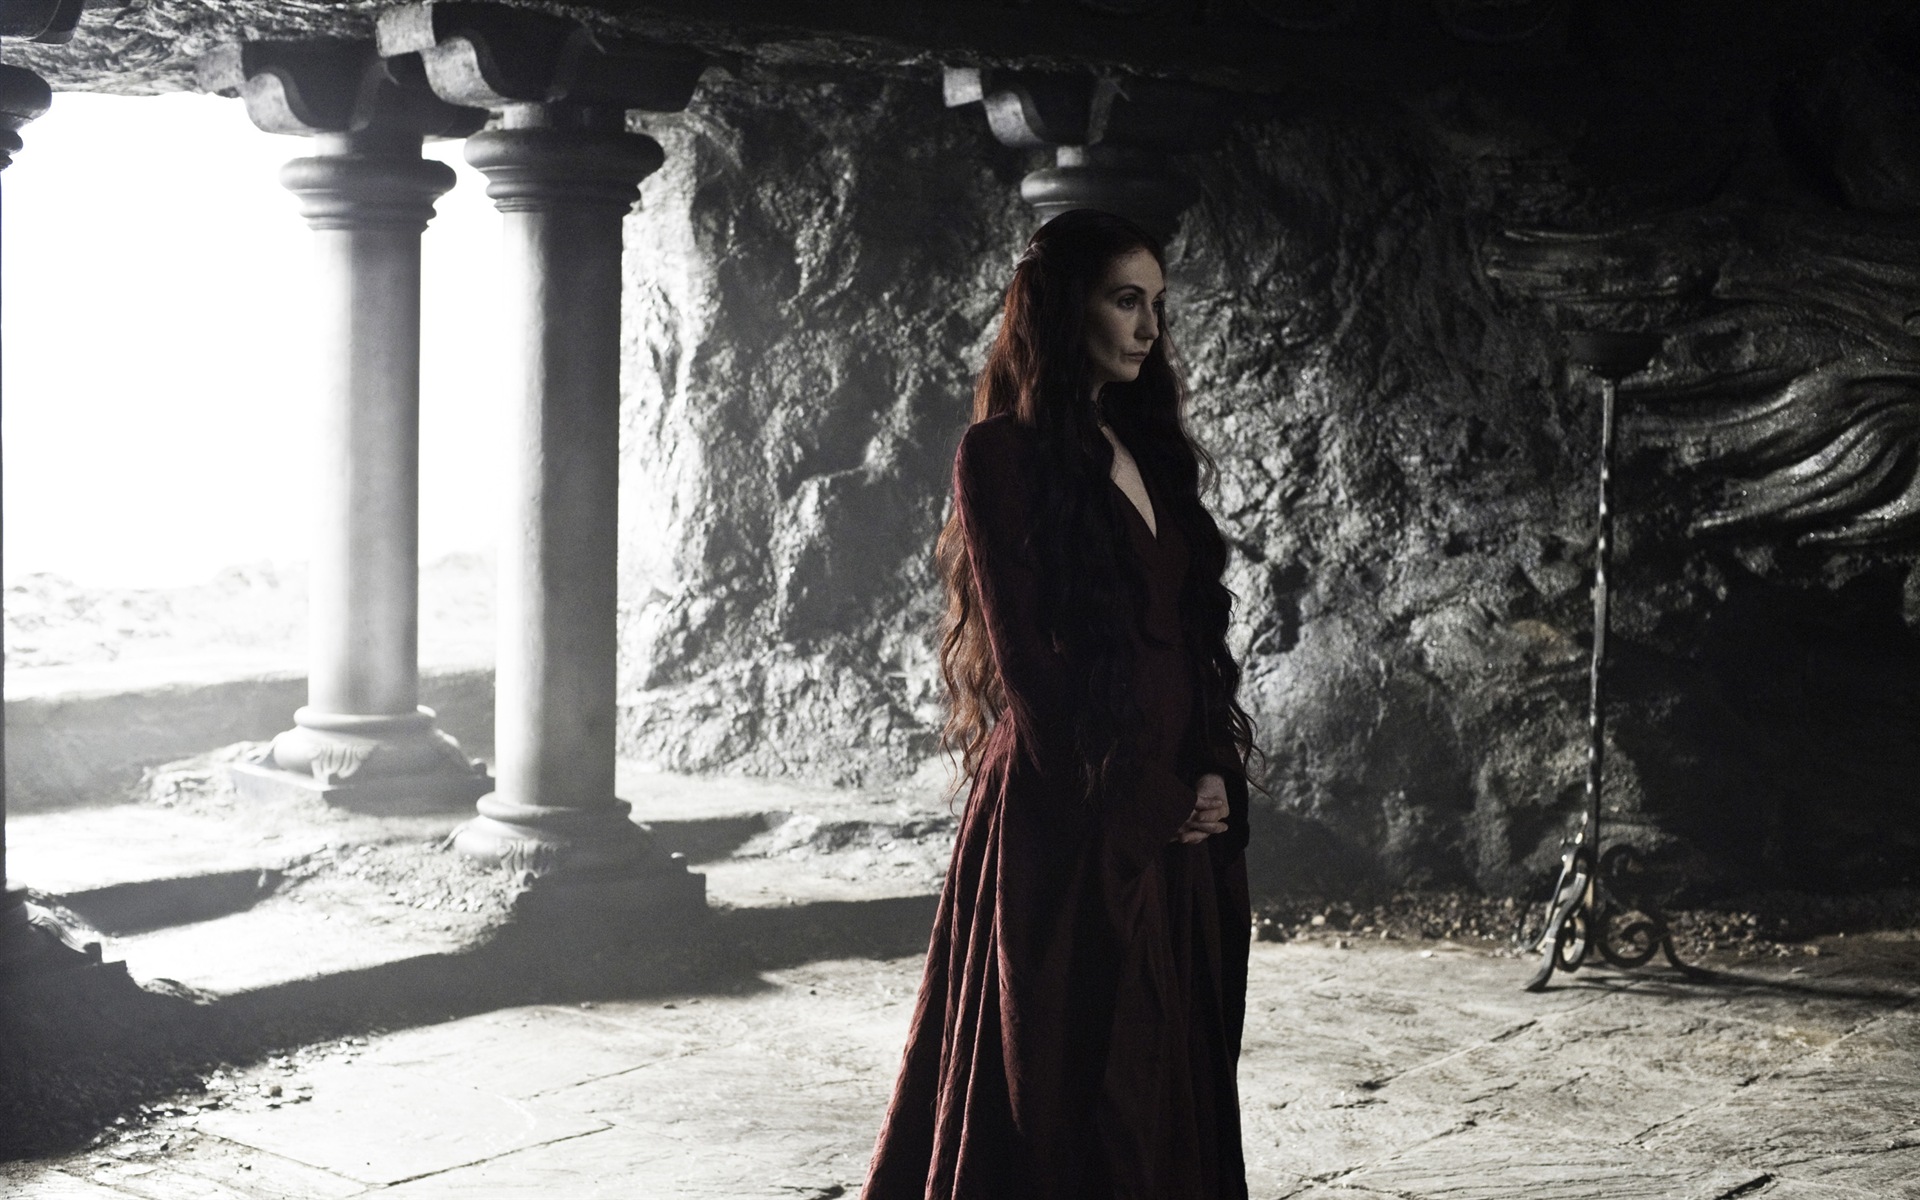 A Song of Ice and Fire: Game of Thrones 冰與火之歌：權力的遊戲高清壁紙 #34 - 1920x1200